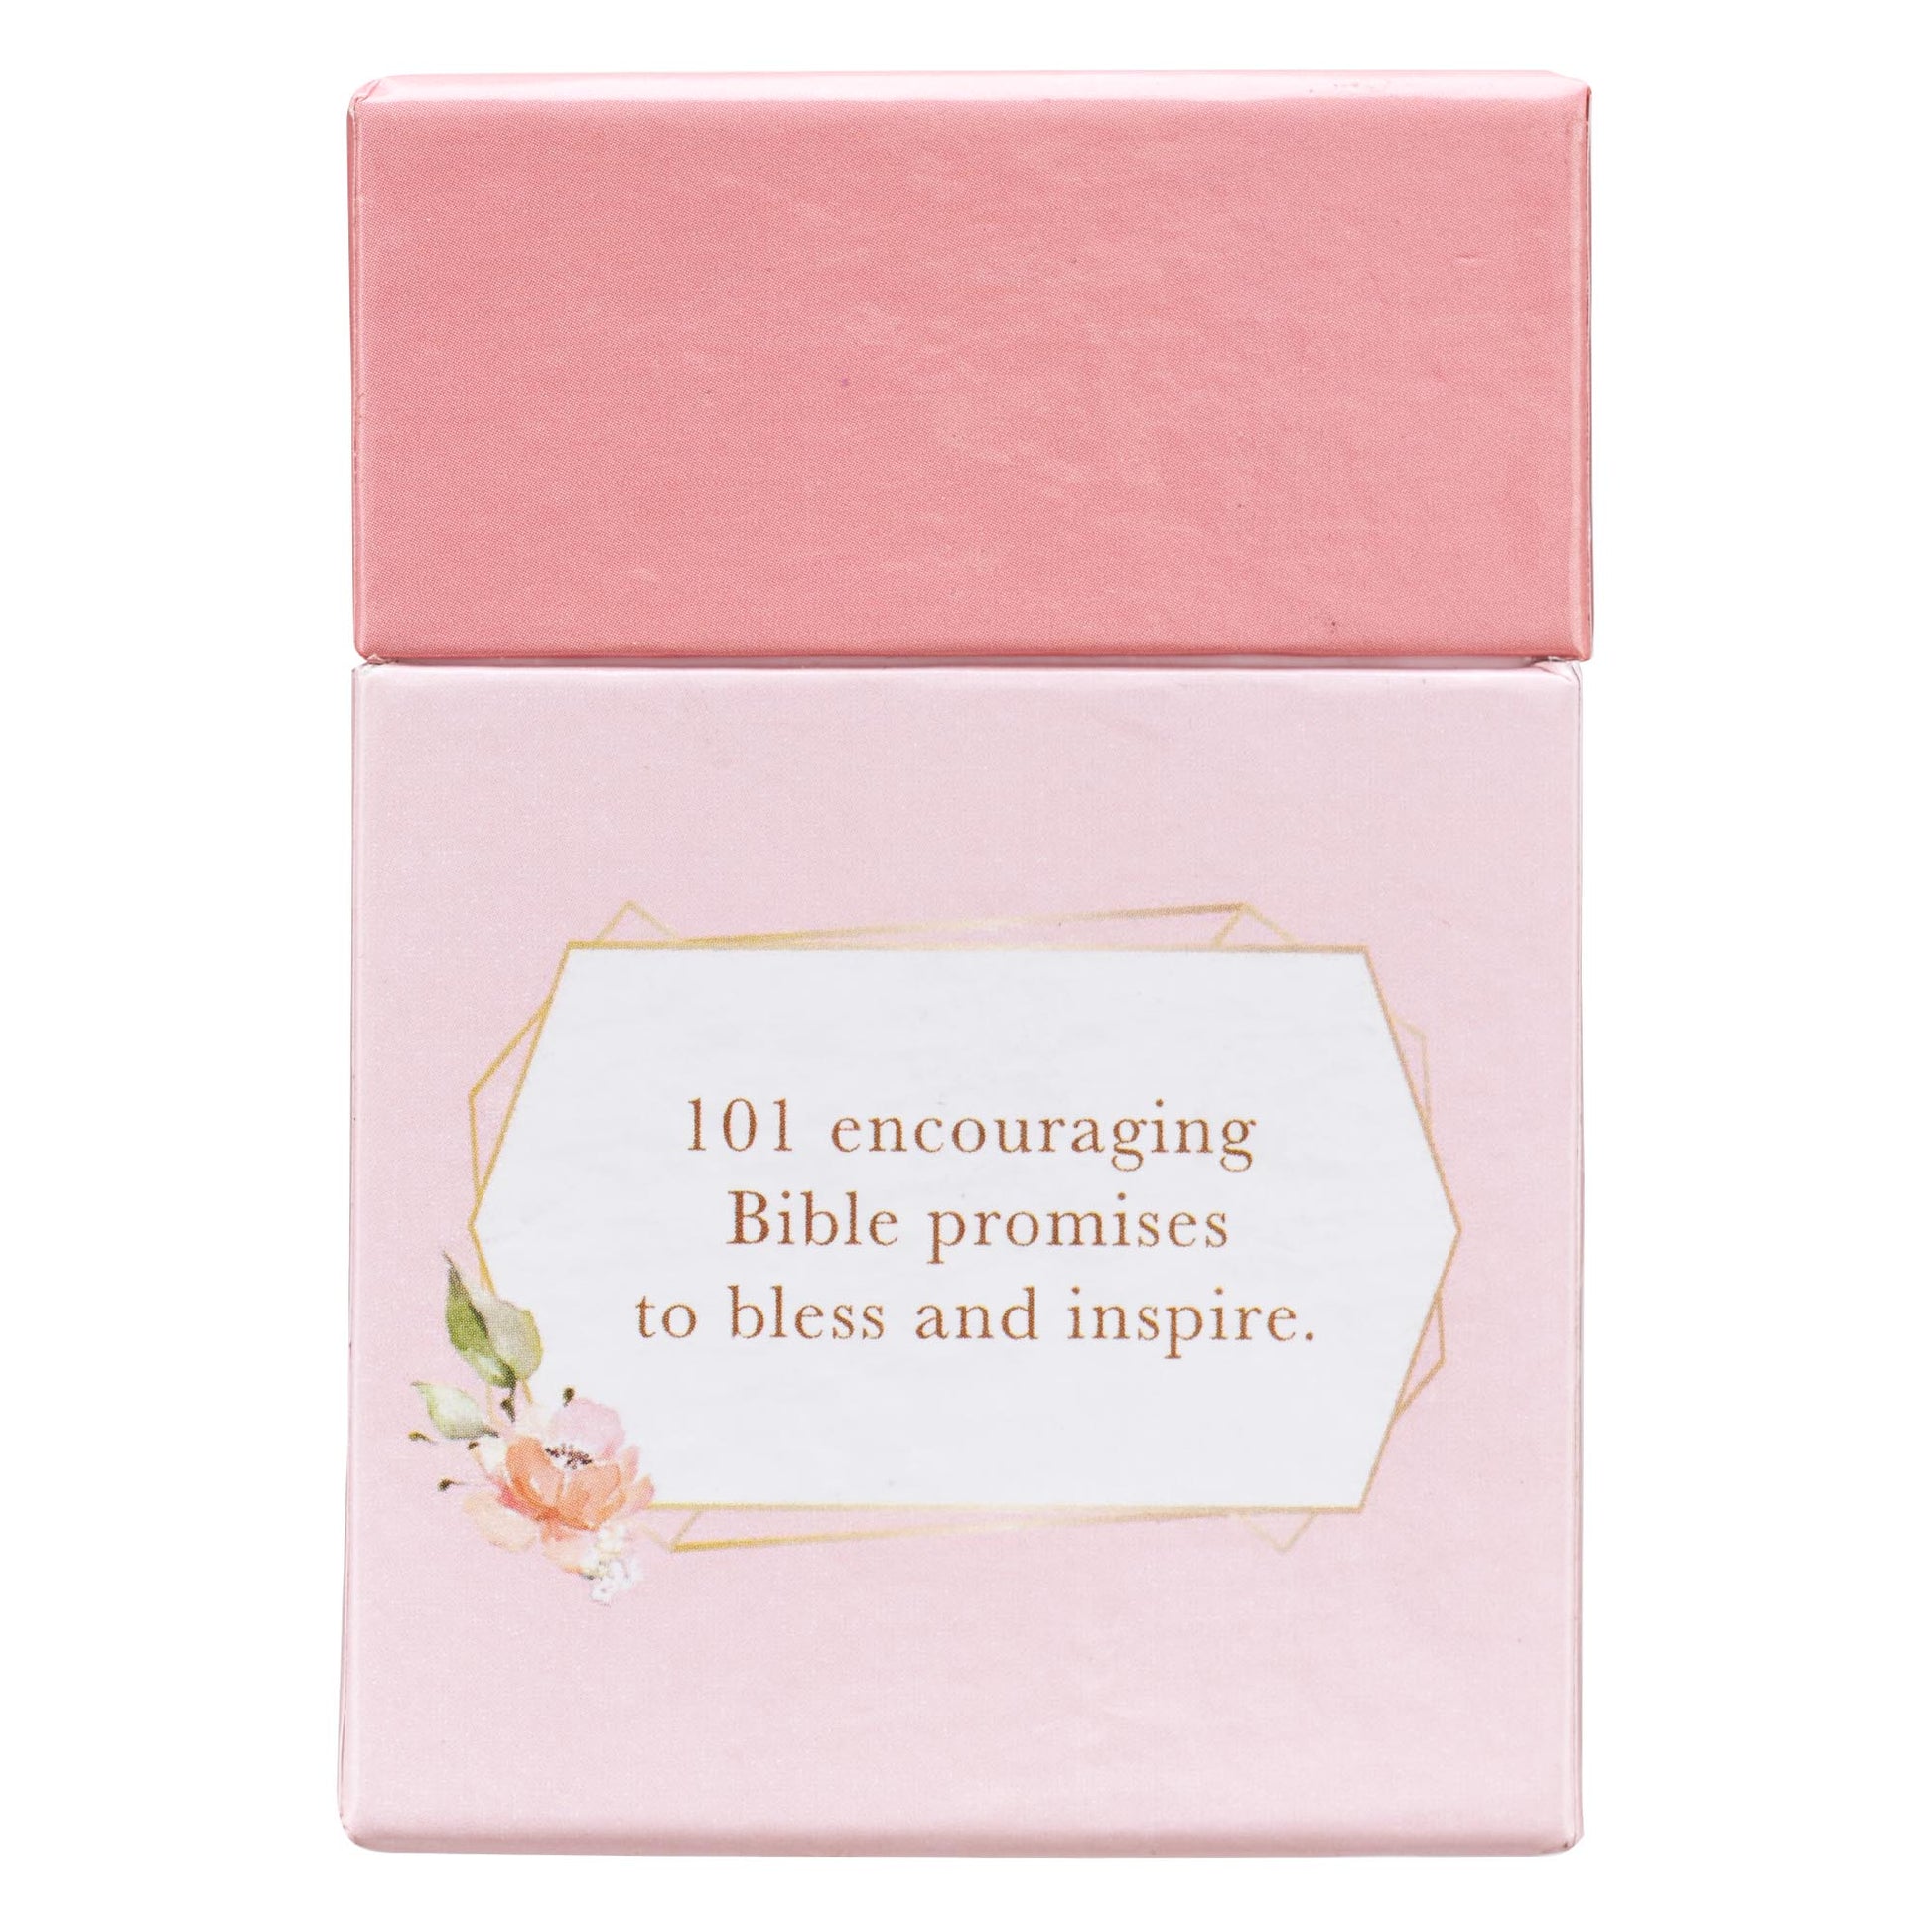 Promises to Bless Your Soul Box of Blessings - The Christian Gift Company